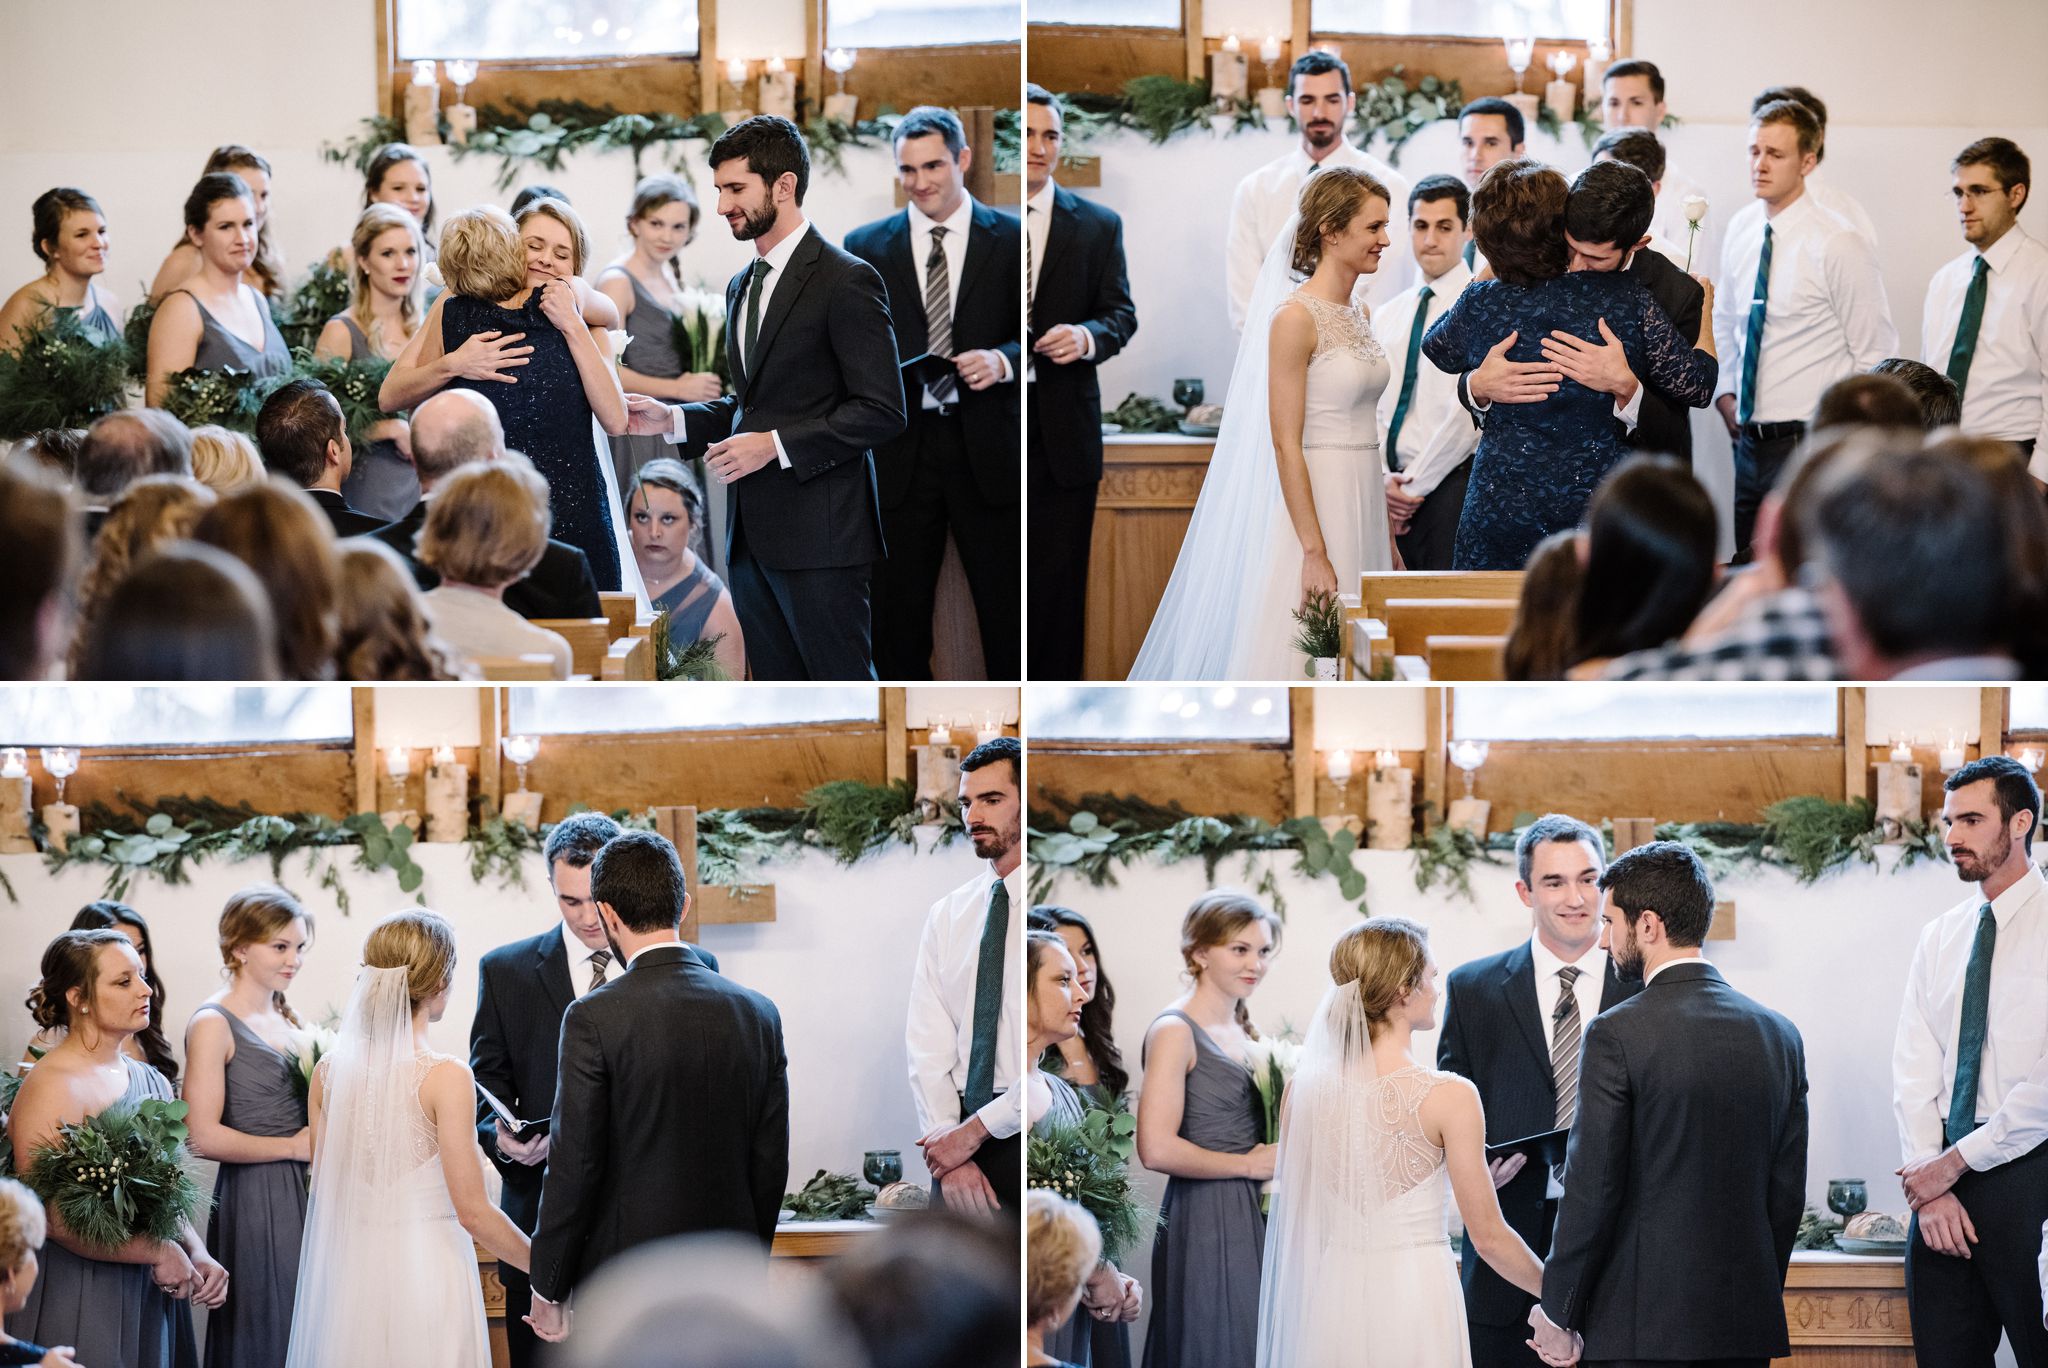 A collage of photos of a wedding ceremony in the chapel at the Larimore House